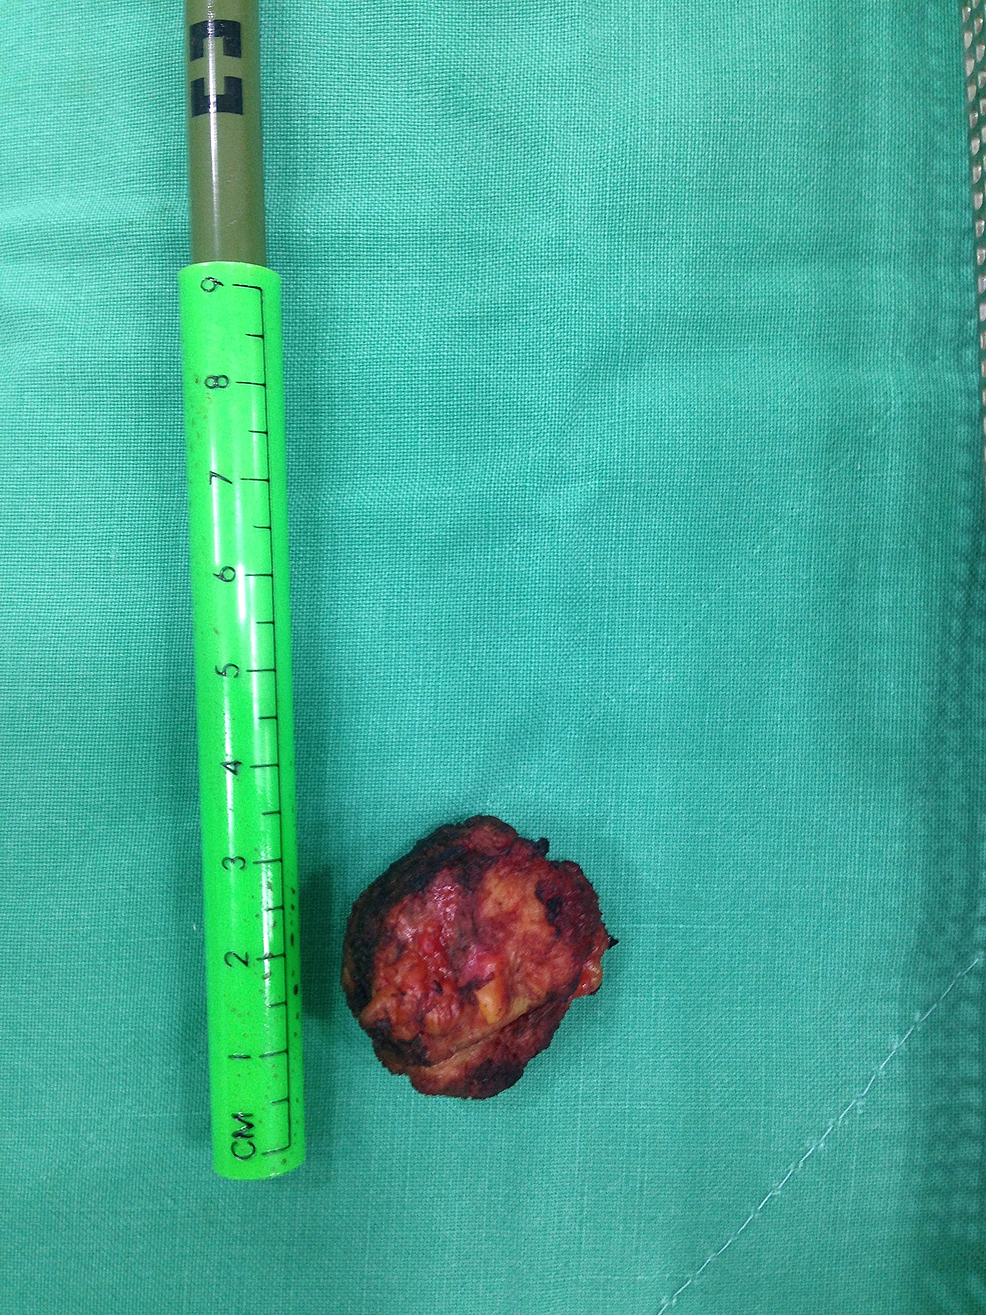 Image-showing-the-resected-endometrioma-next-to-a-graded-ruler.